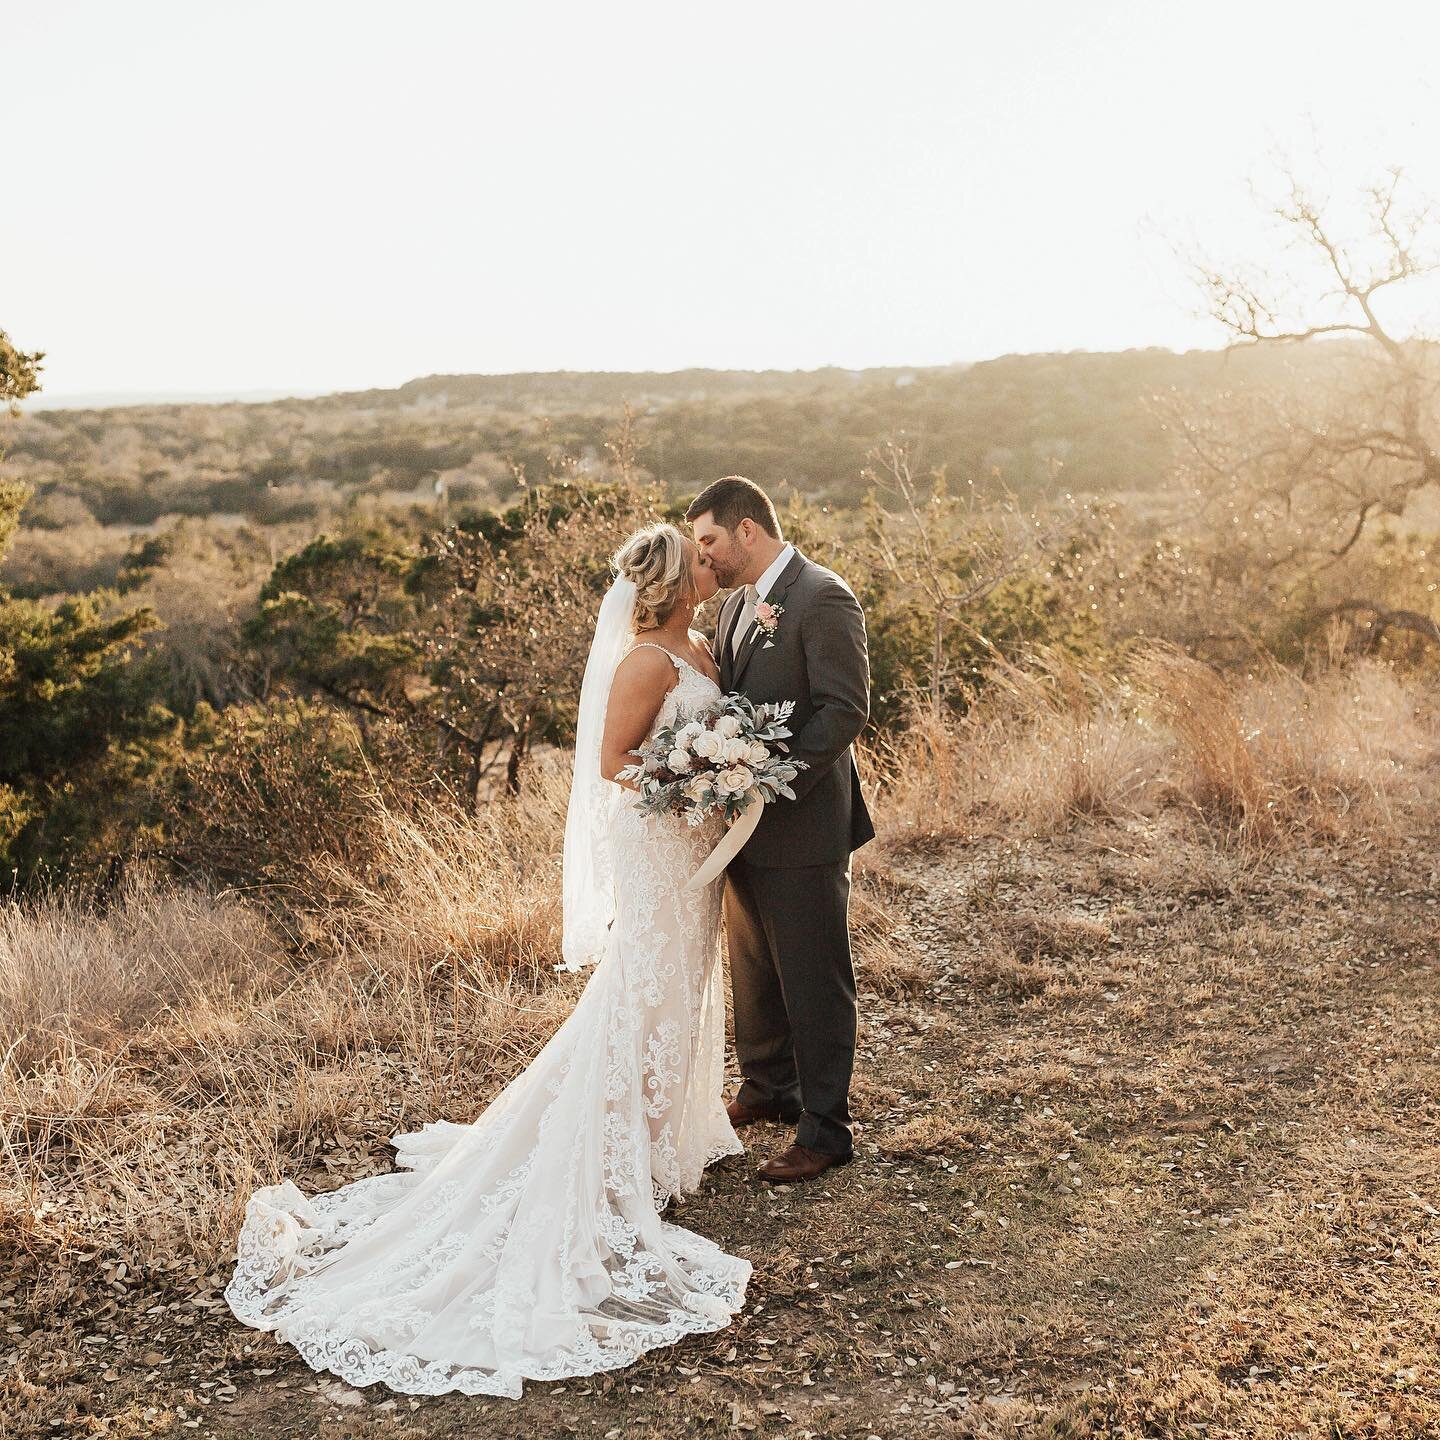 MR. + MRS. SANCHEZ ✨ last Saturday in the hill country with Alec and Cheyenne ✨ so happy for these two and honored they chose me to capture their special day!! I&rsquo;ve been living through their honeymoon snaps all week 😍